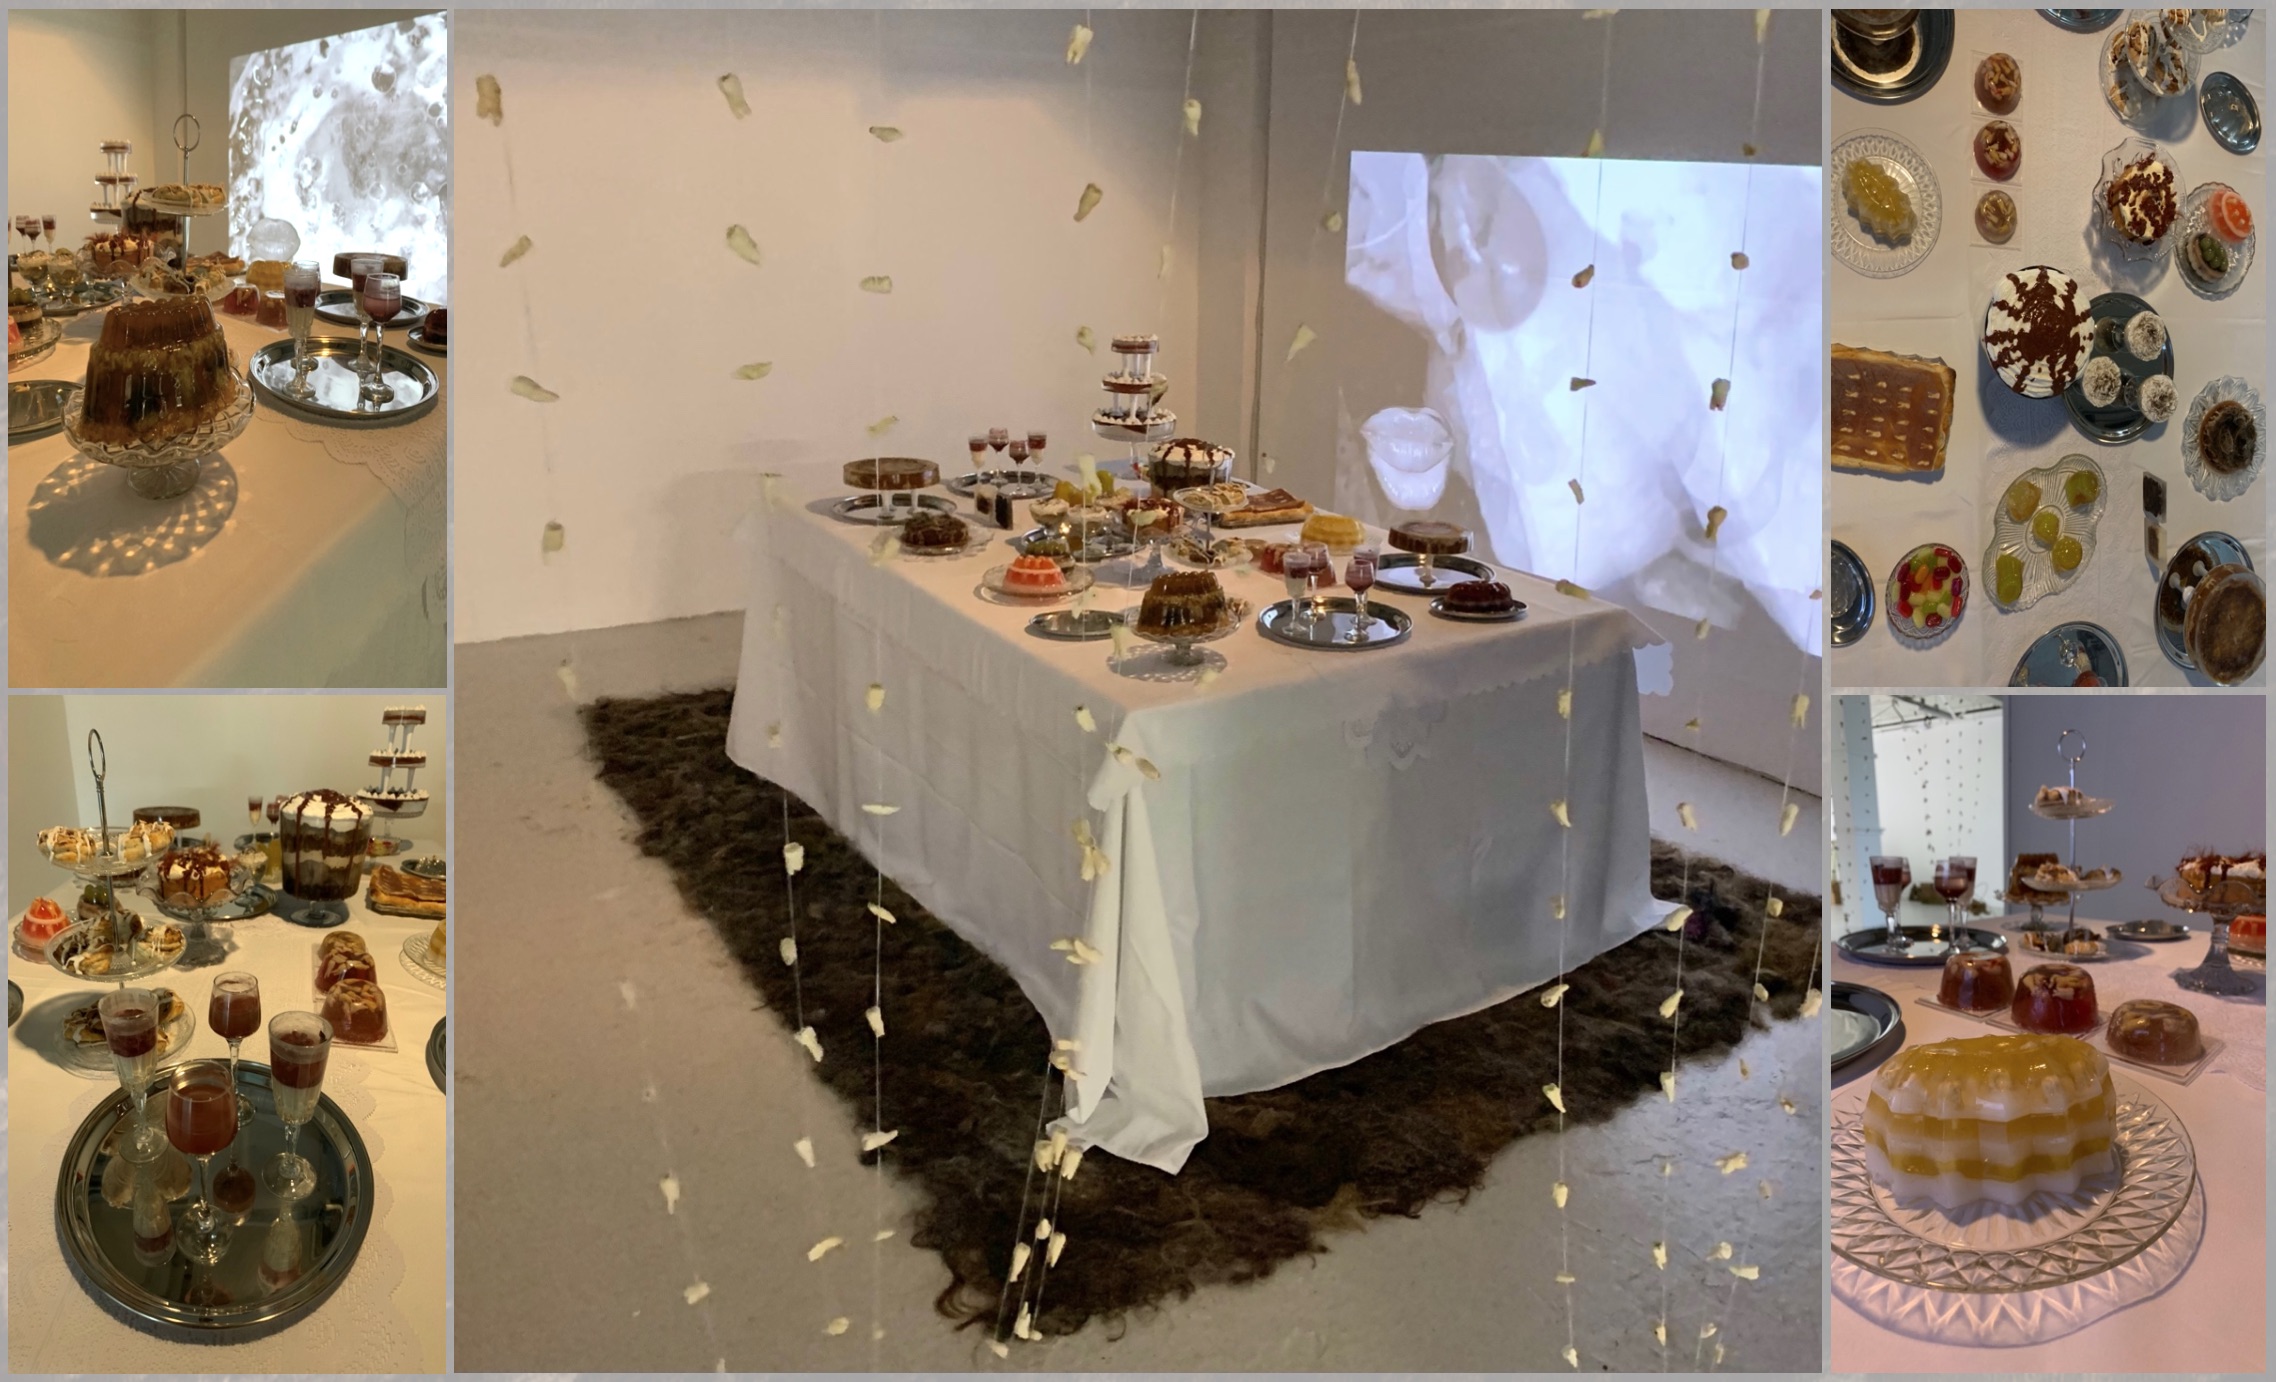 BA Fine Art work by Chloe Lees showing an installation of of a grotesque dessert buffet including foods, bodily remnants, a rug of human hair and a projected film work.